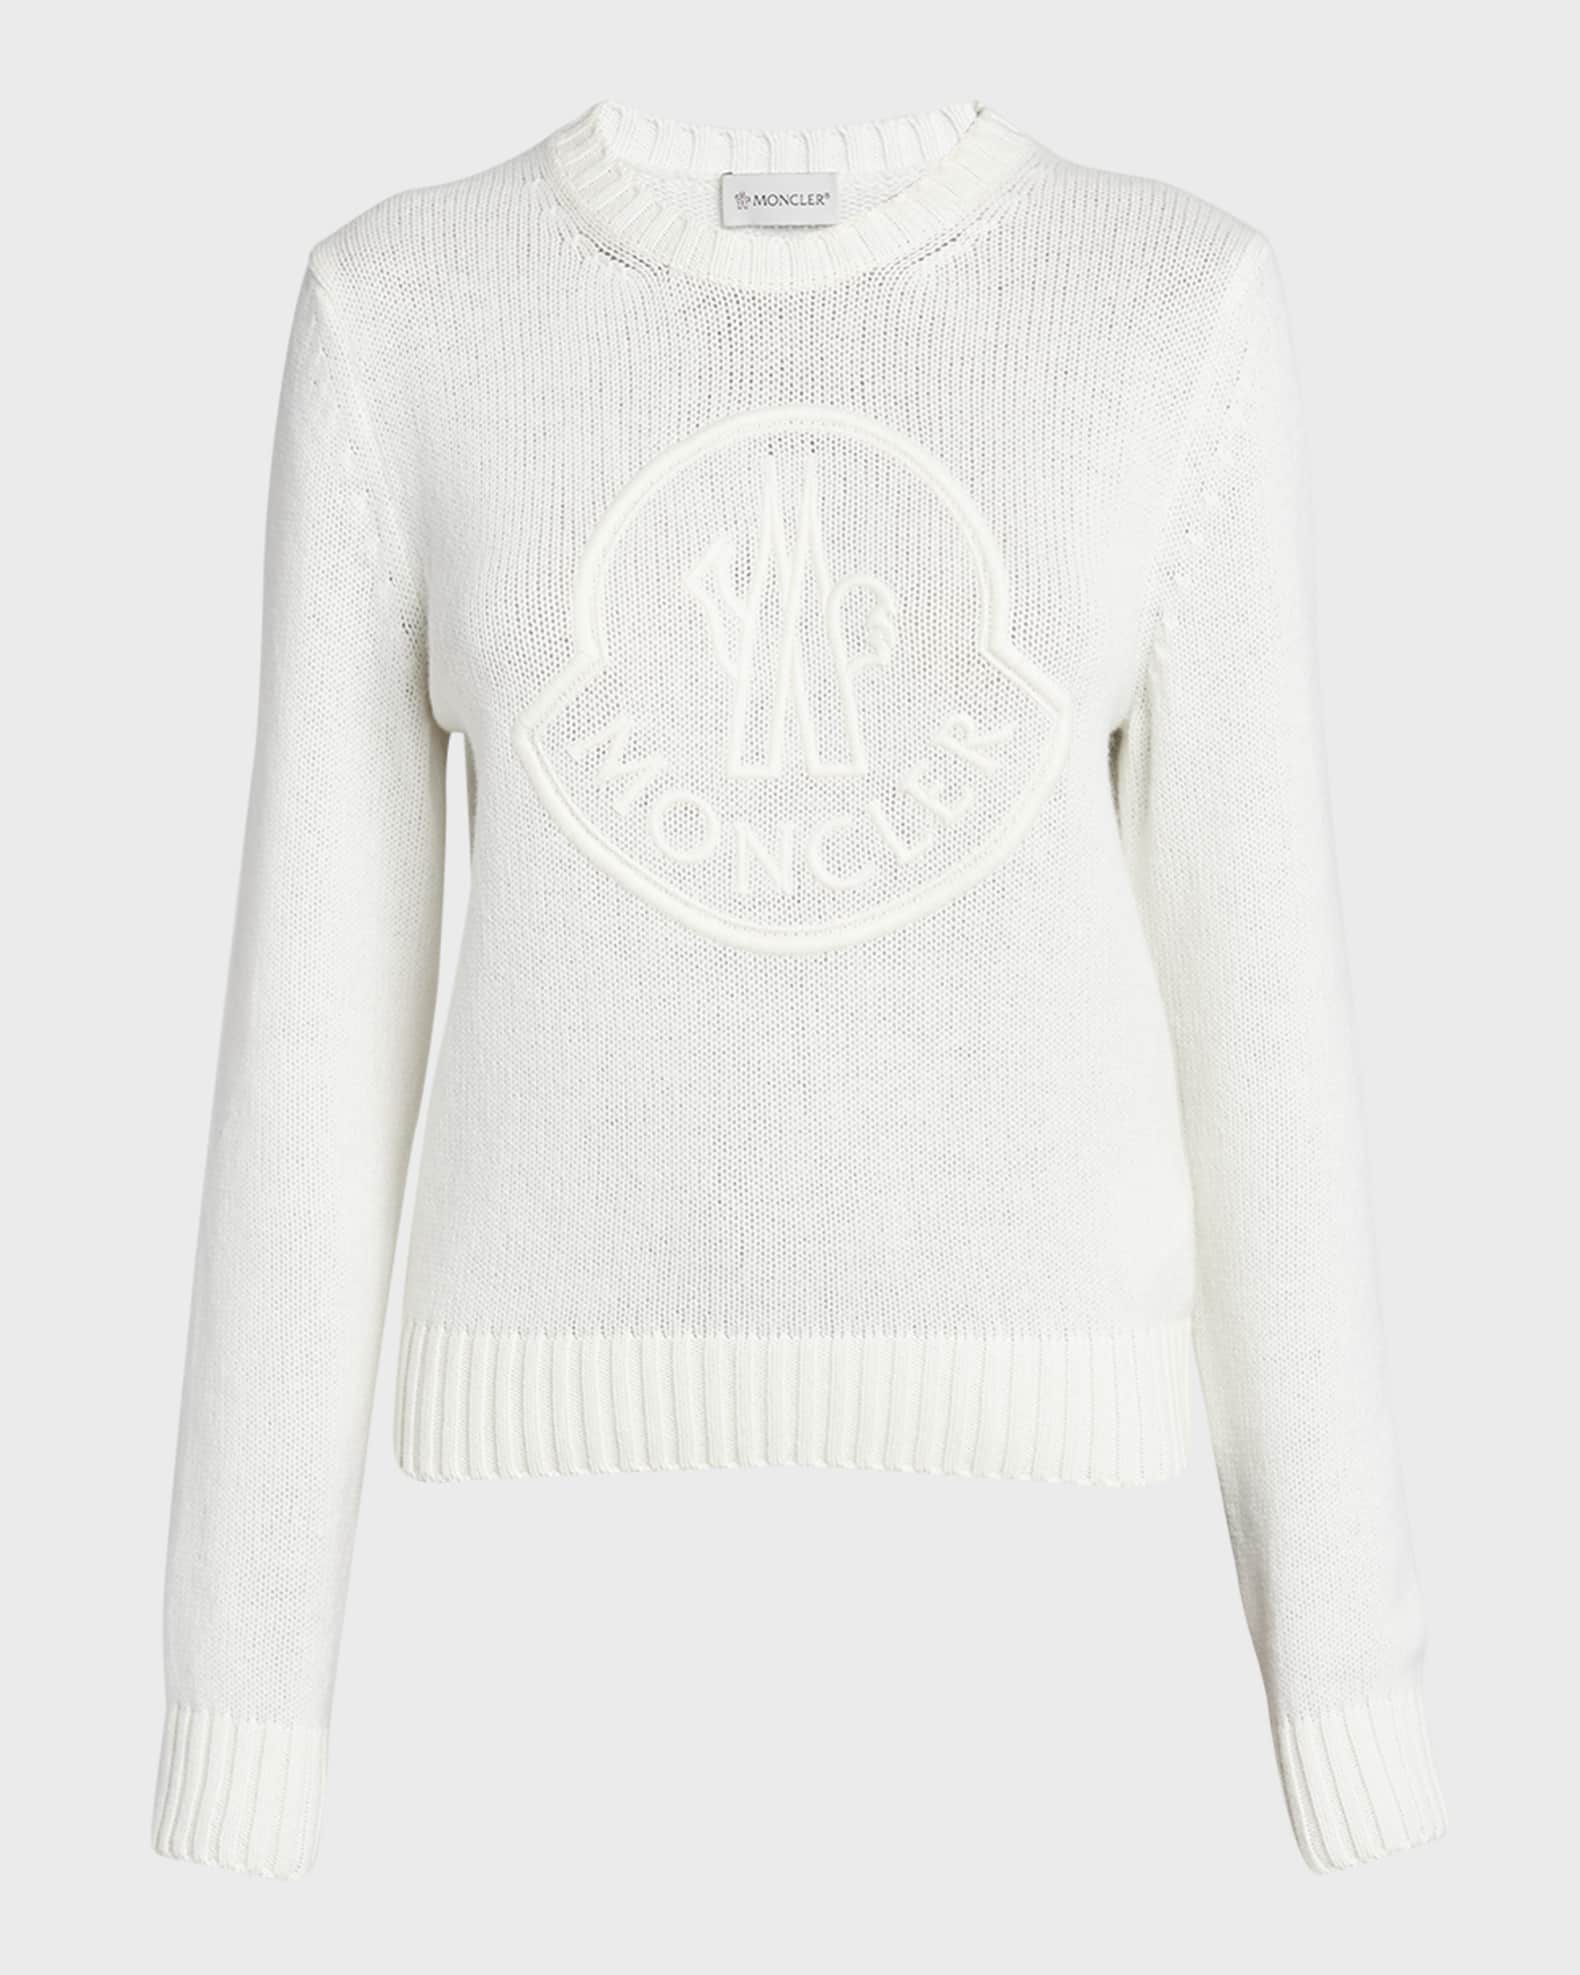 Moncler Cashmere Embroidered Logo Sweater | Neiman Marcus